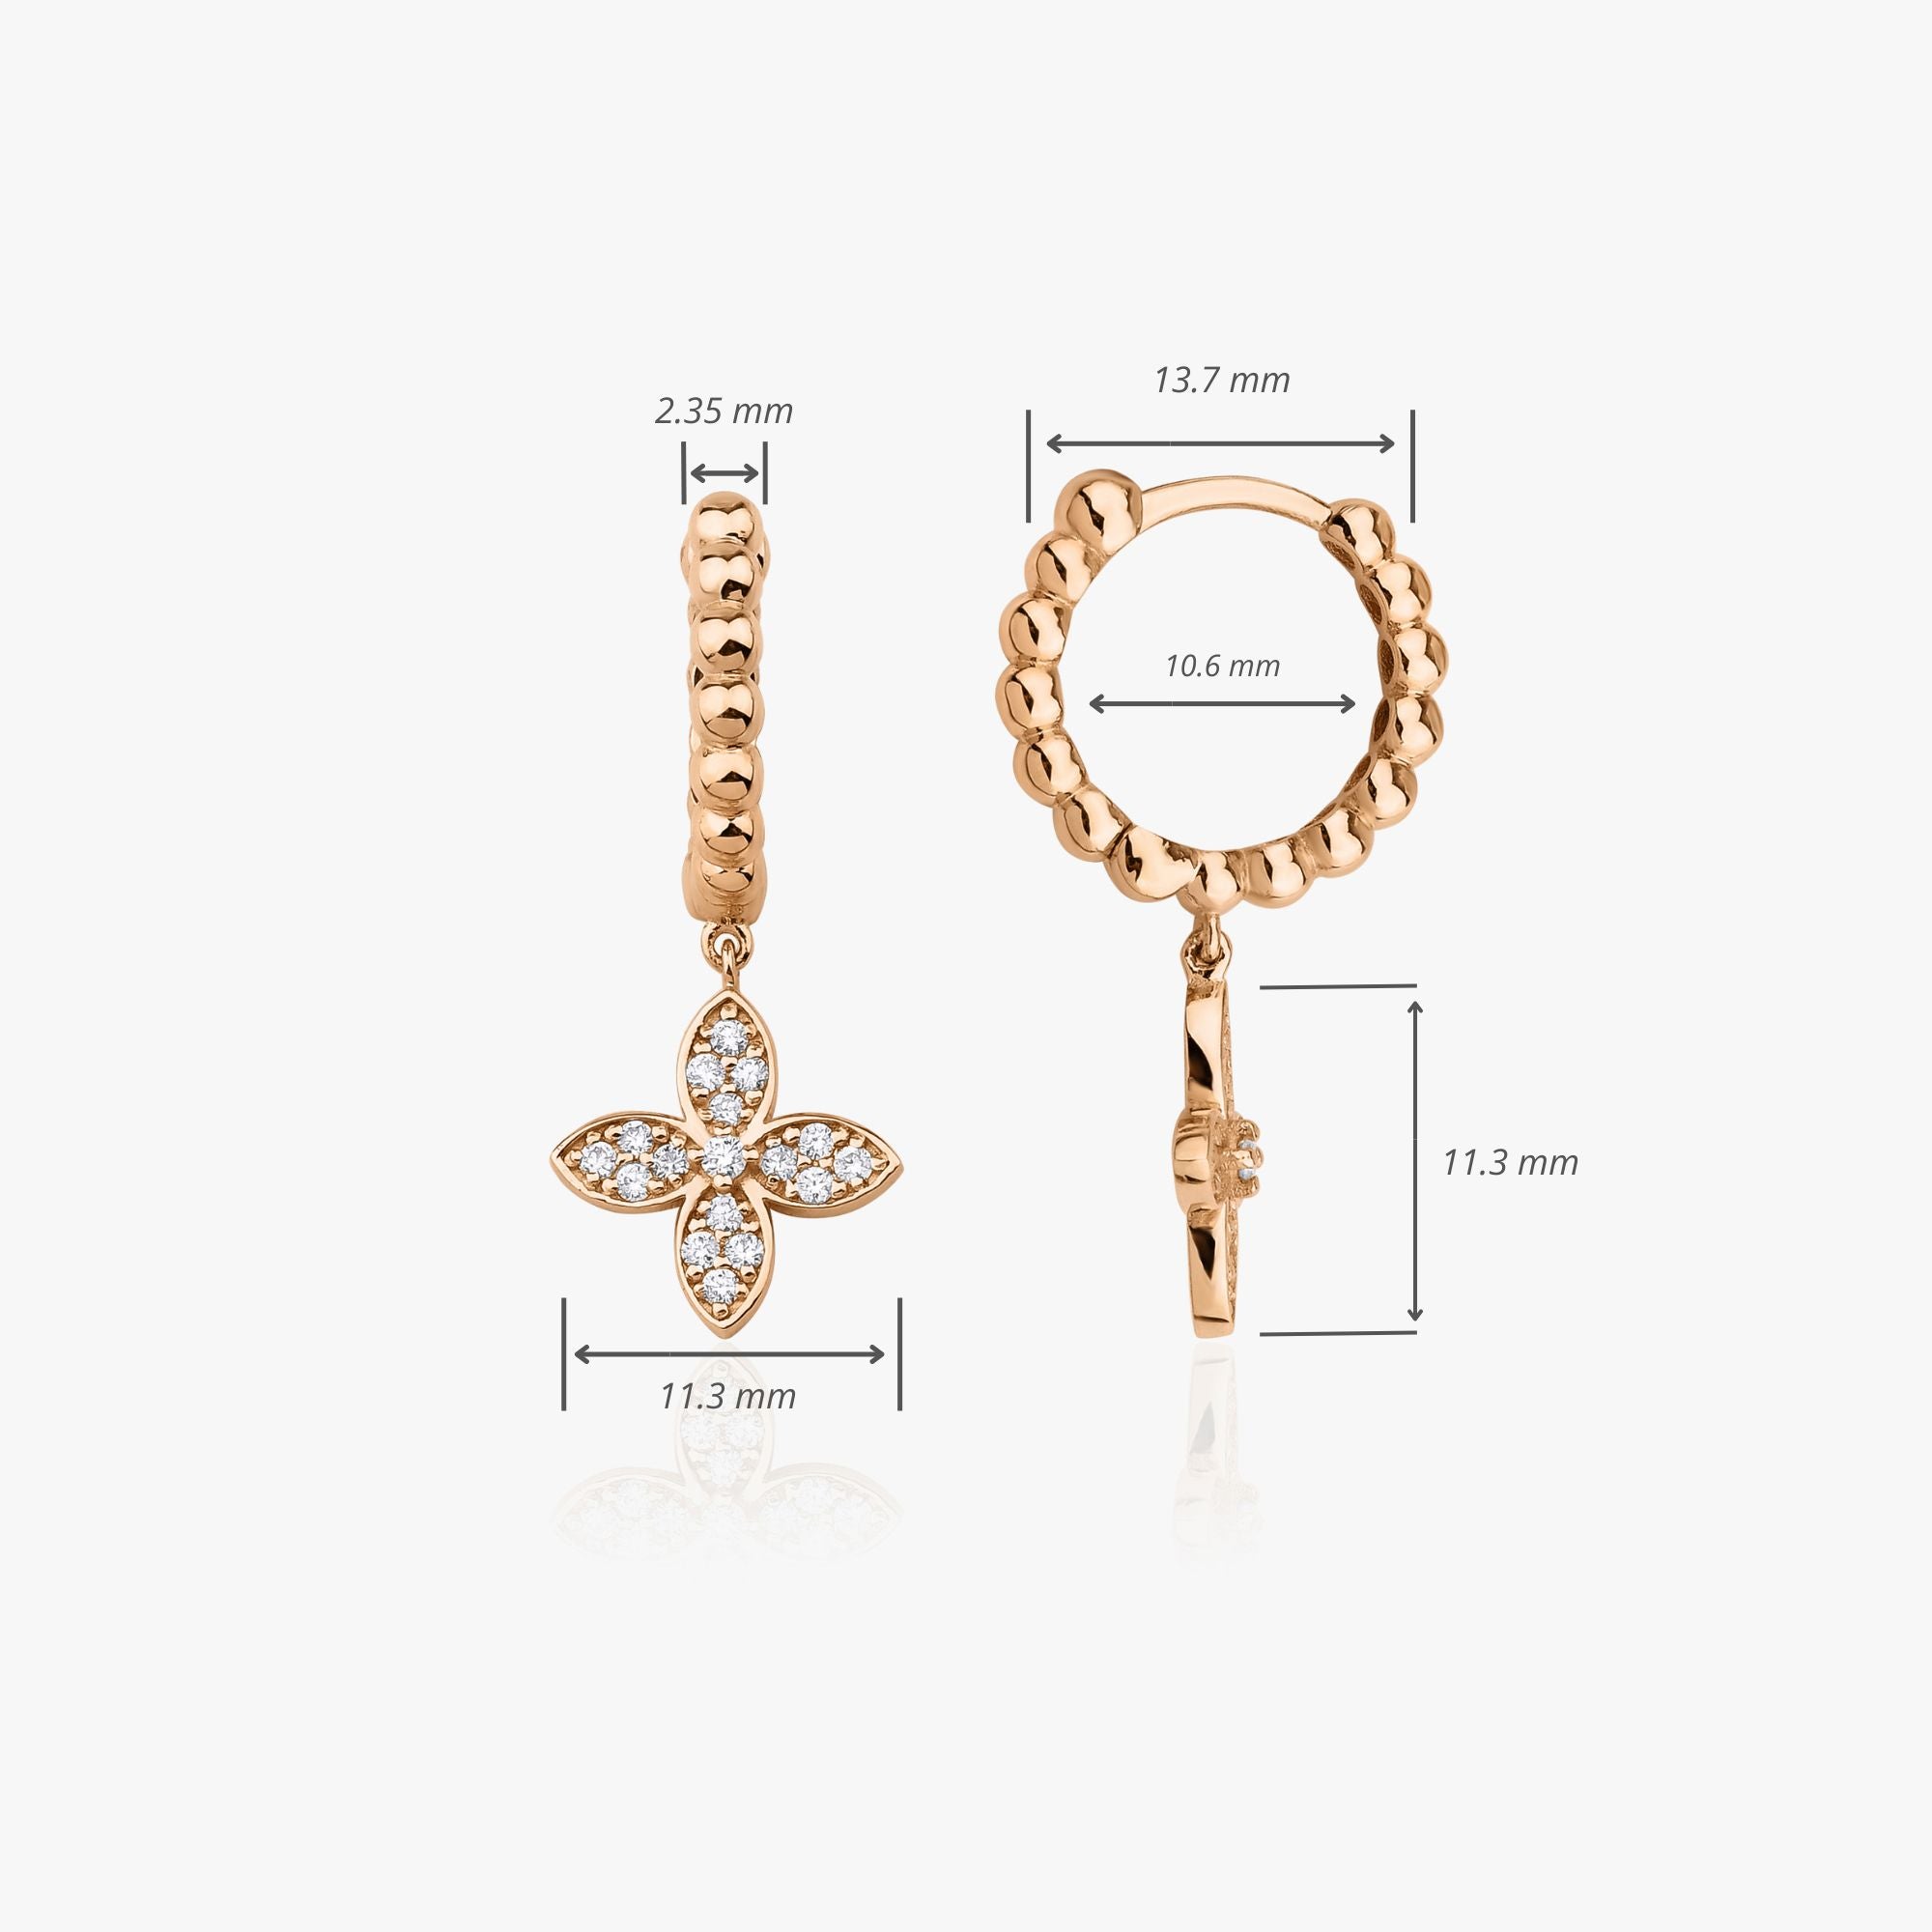 4 Leaf Clover Earrings Available in 14K and 18K Gold